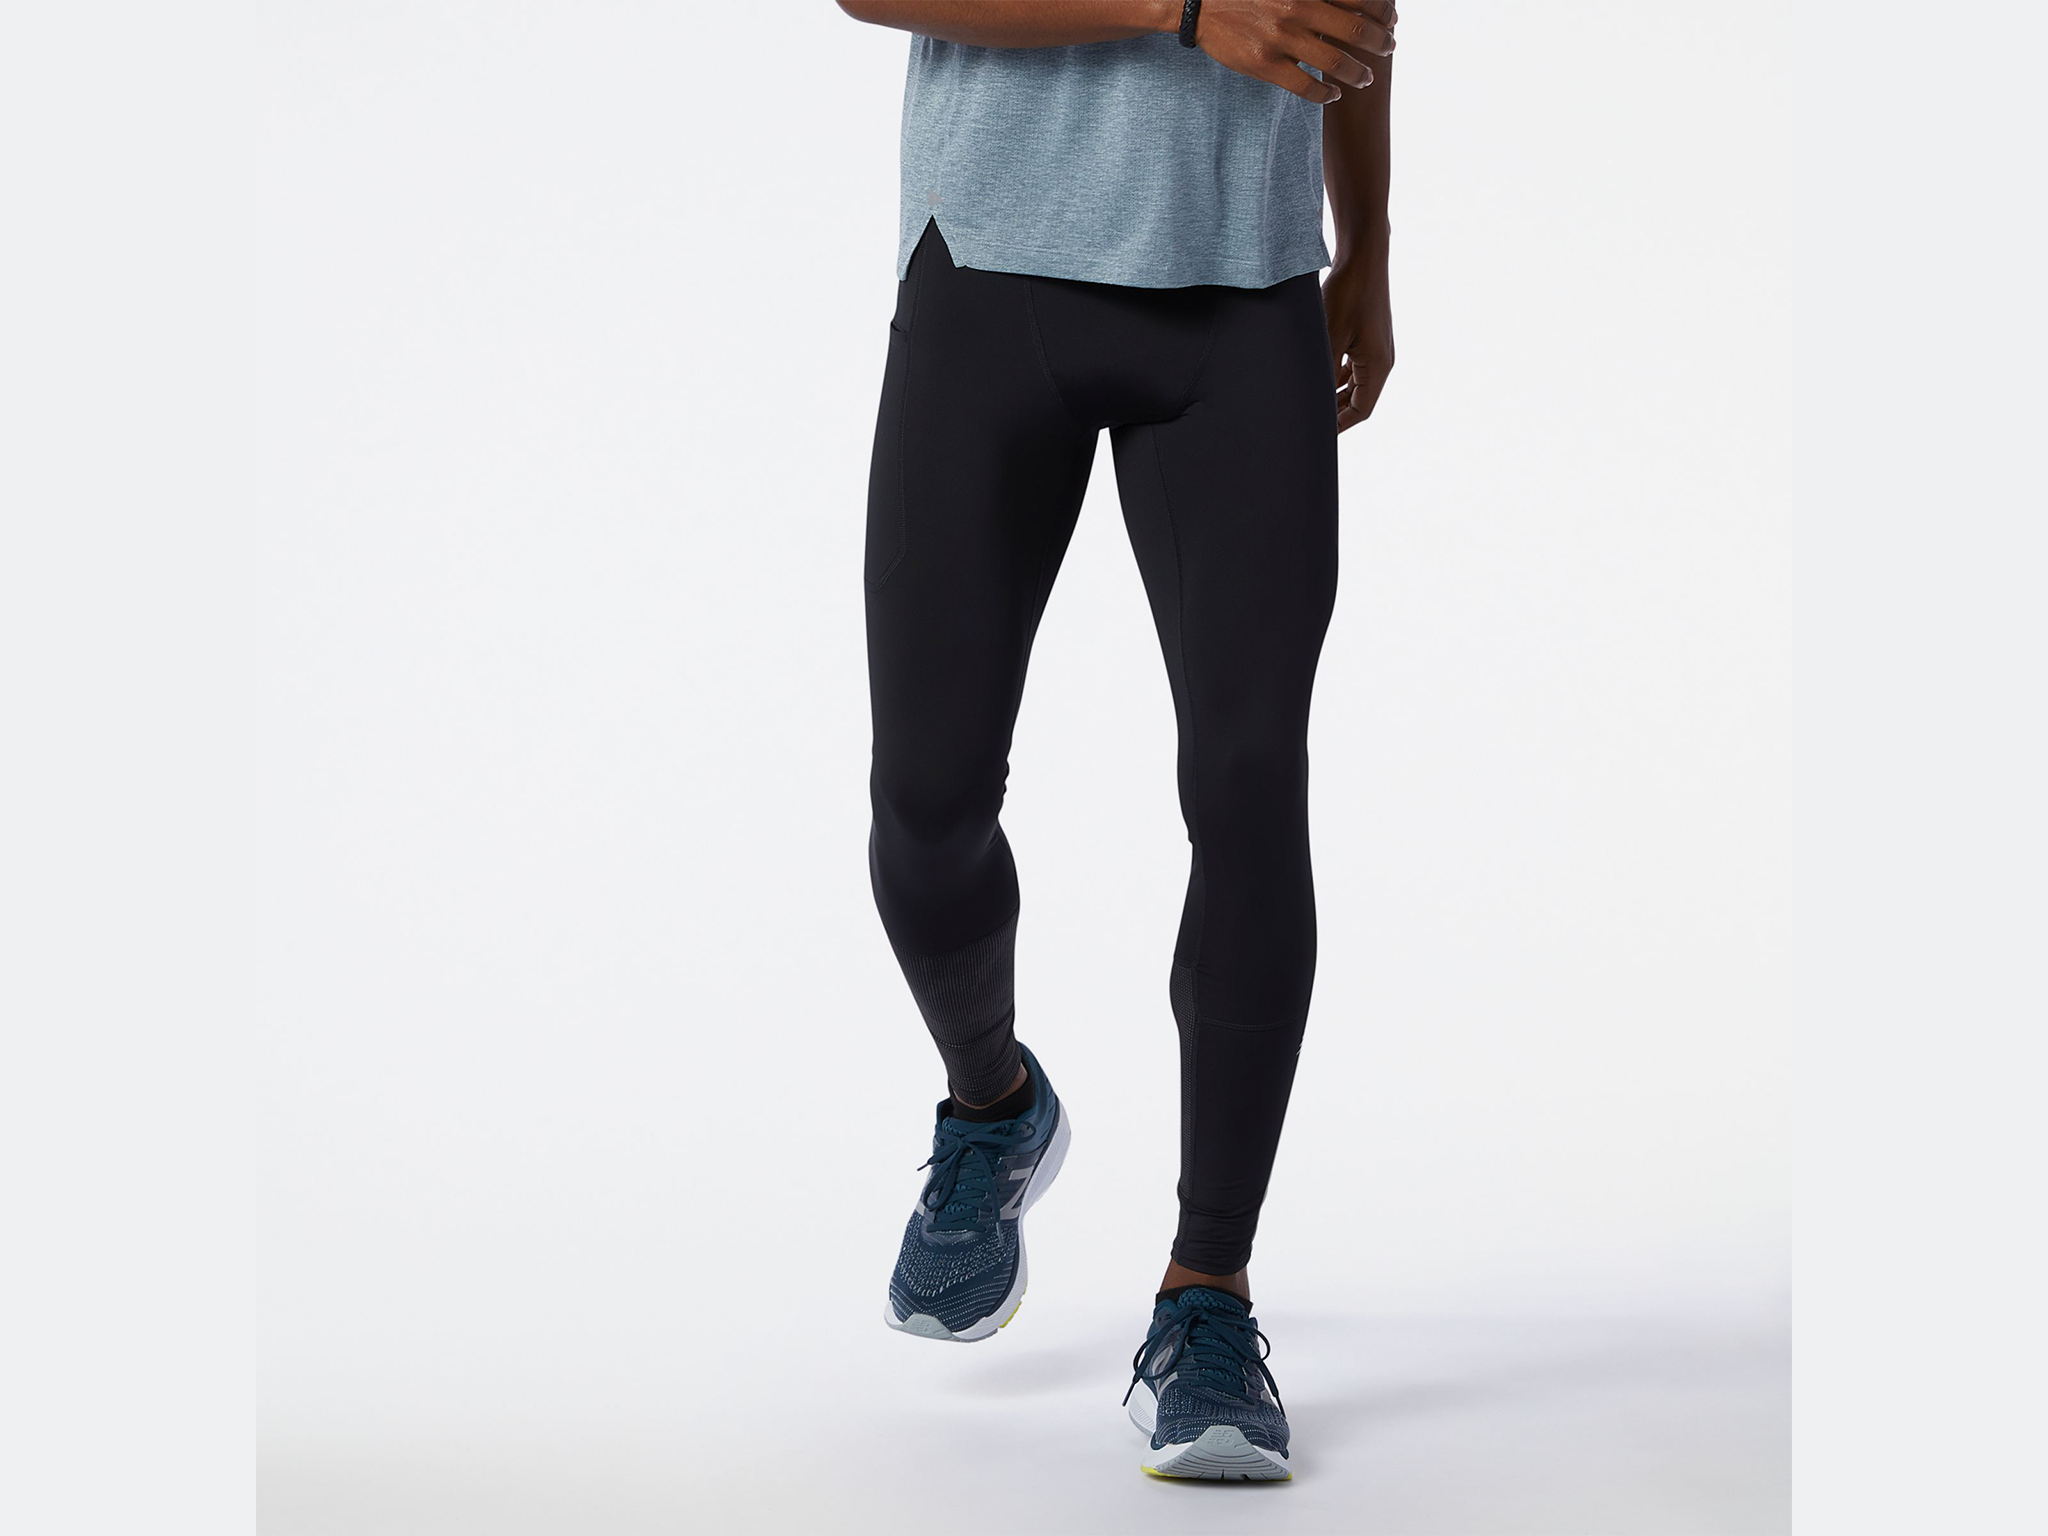 men's running tights: From Adidas to New Balance | Independent